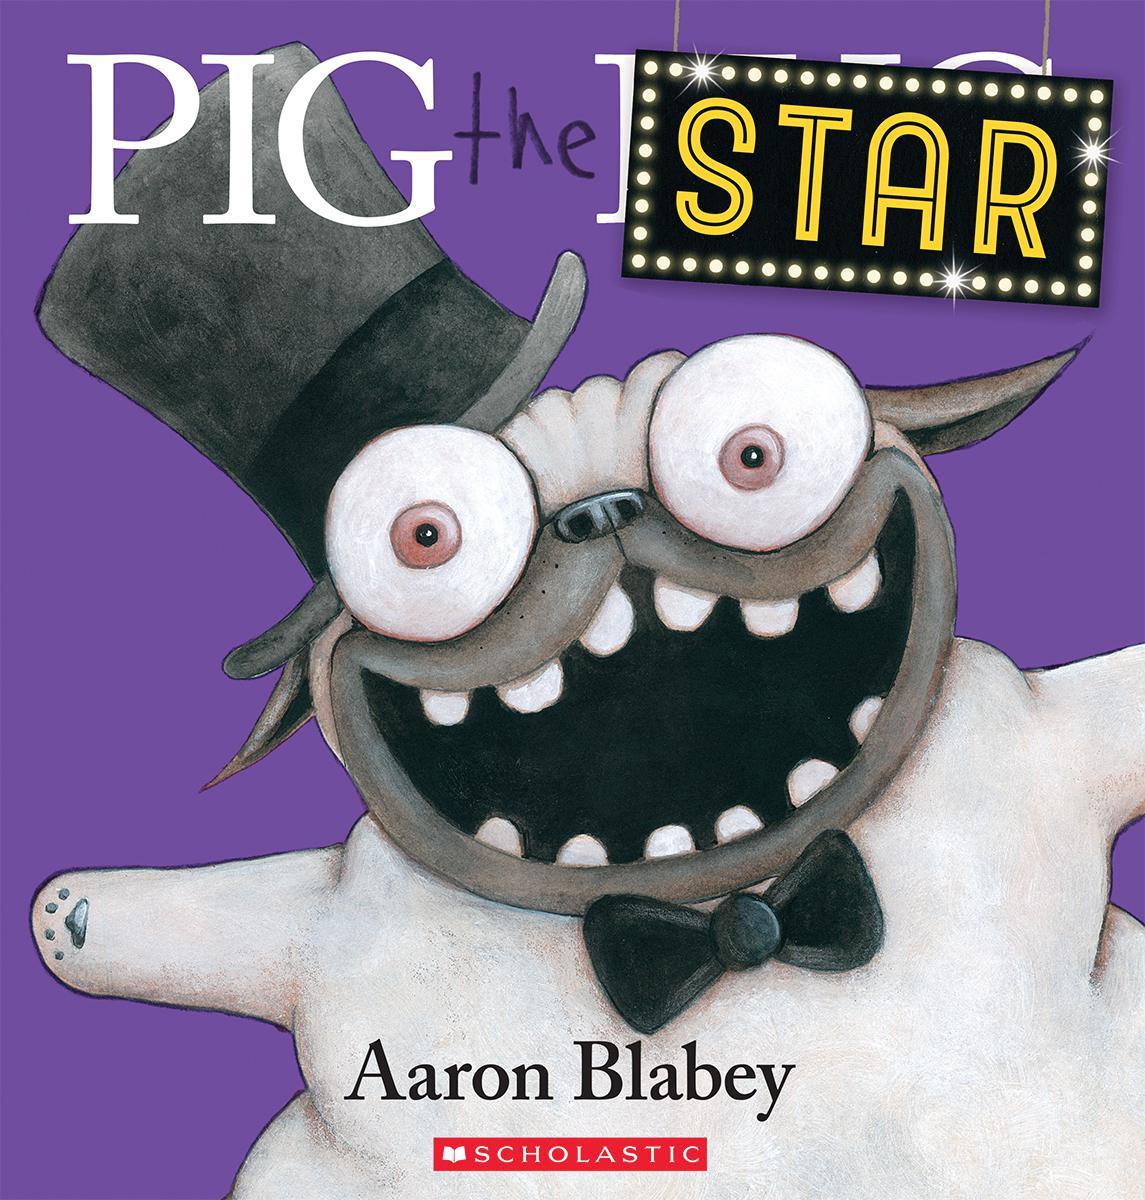  Pig the Star 